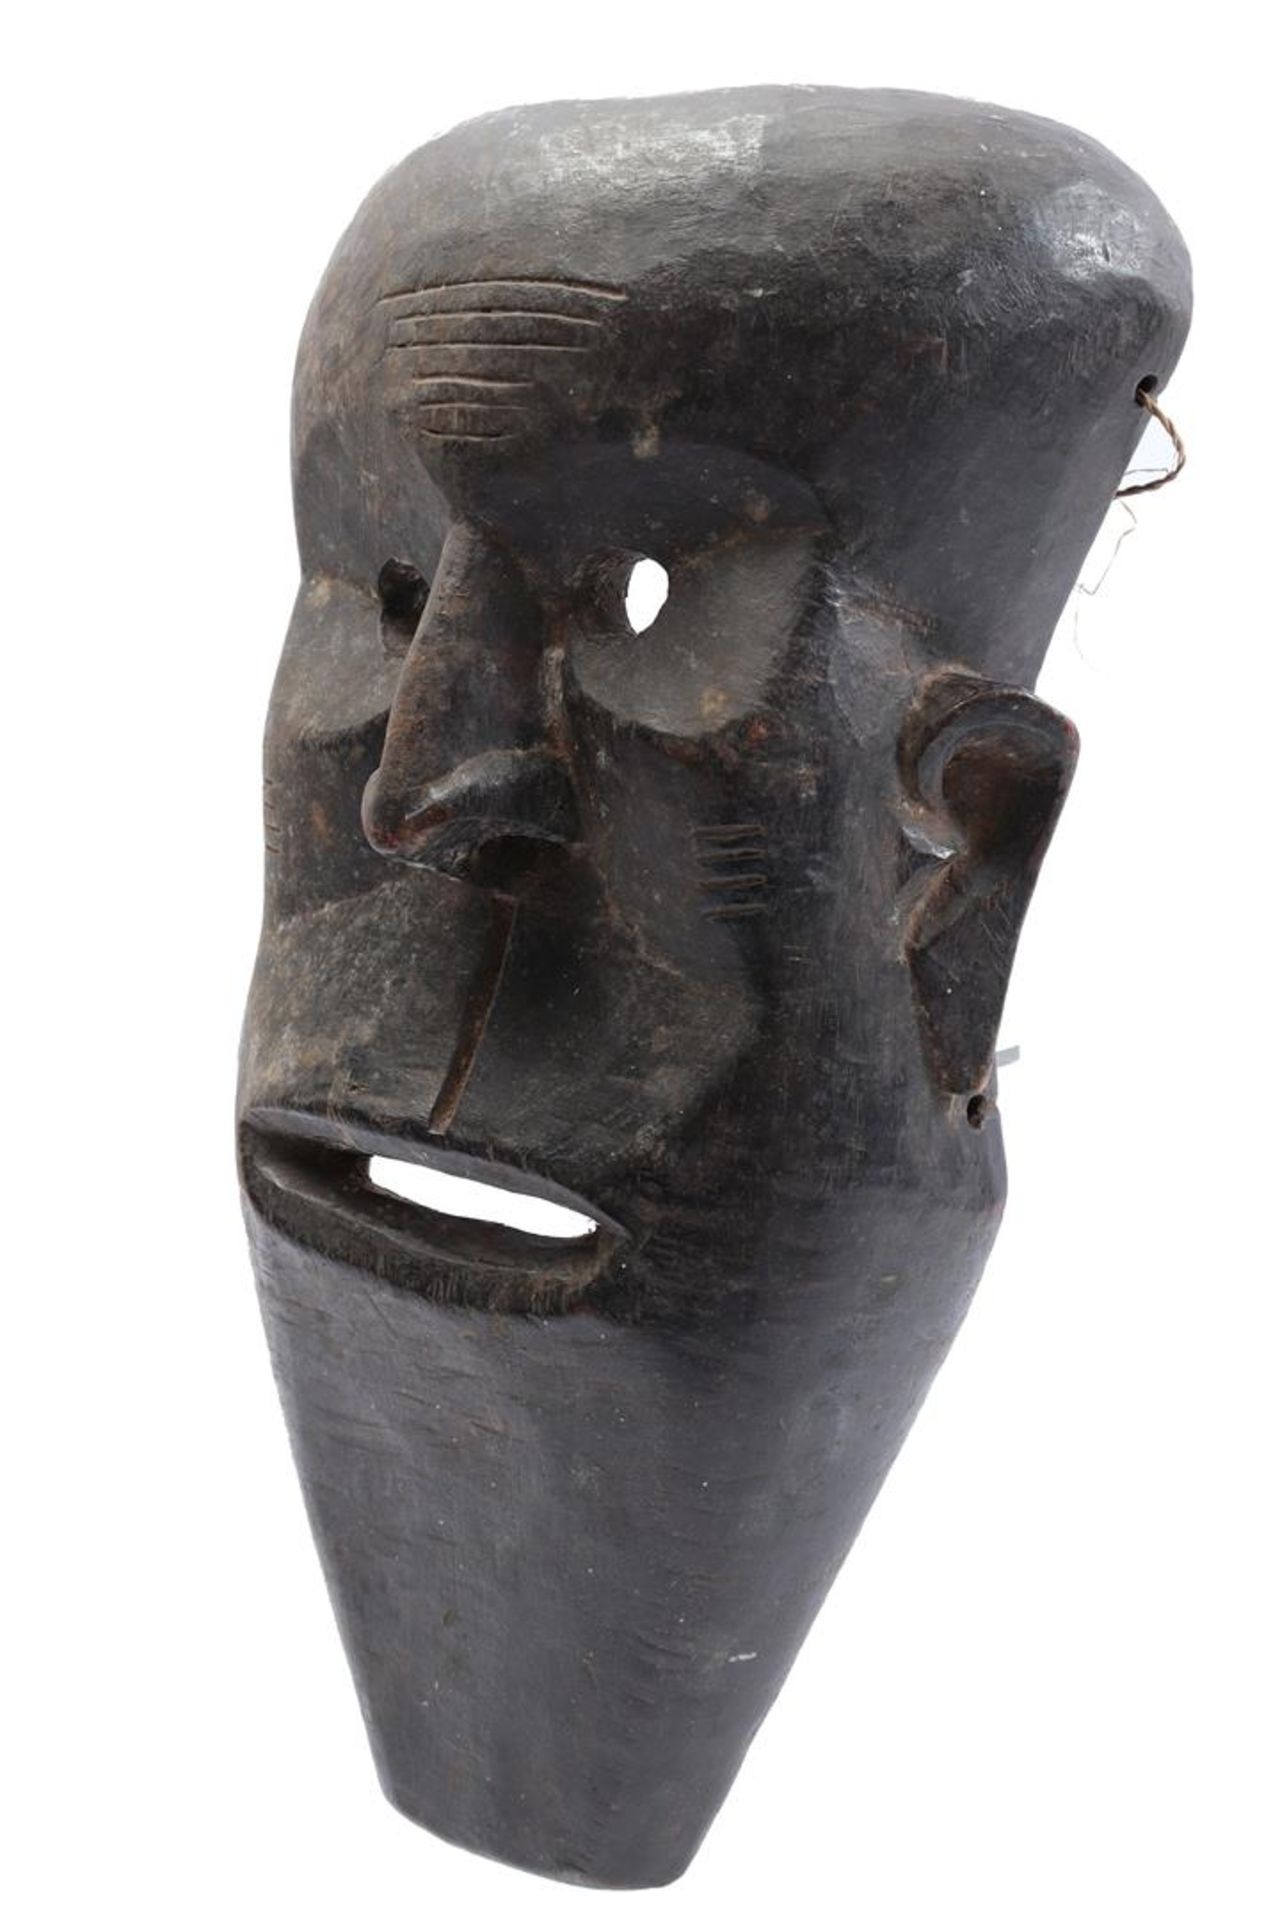 Wooden ceremonial mask, Kuba, possibly Songay - Image 2 of 3